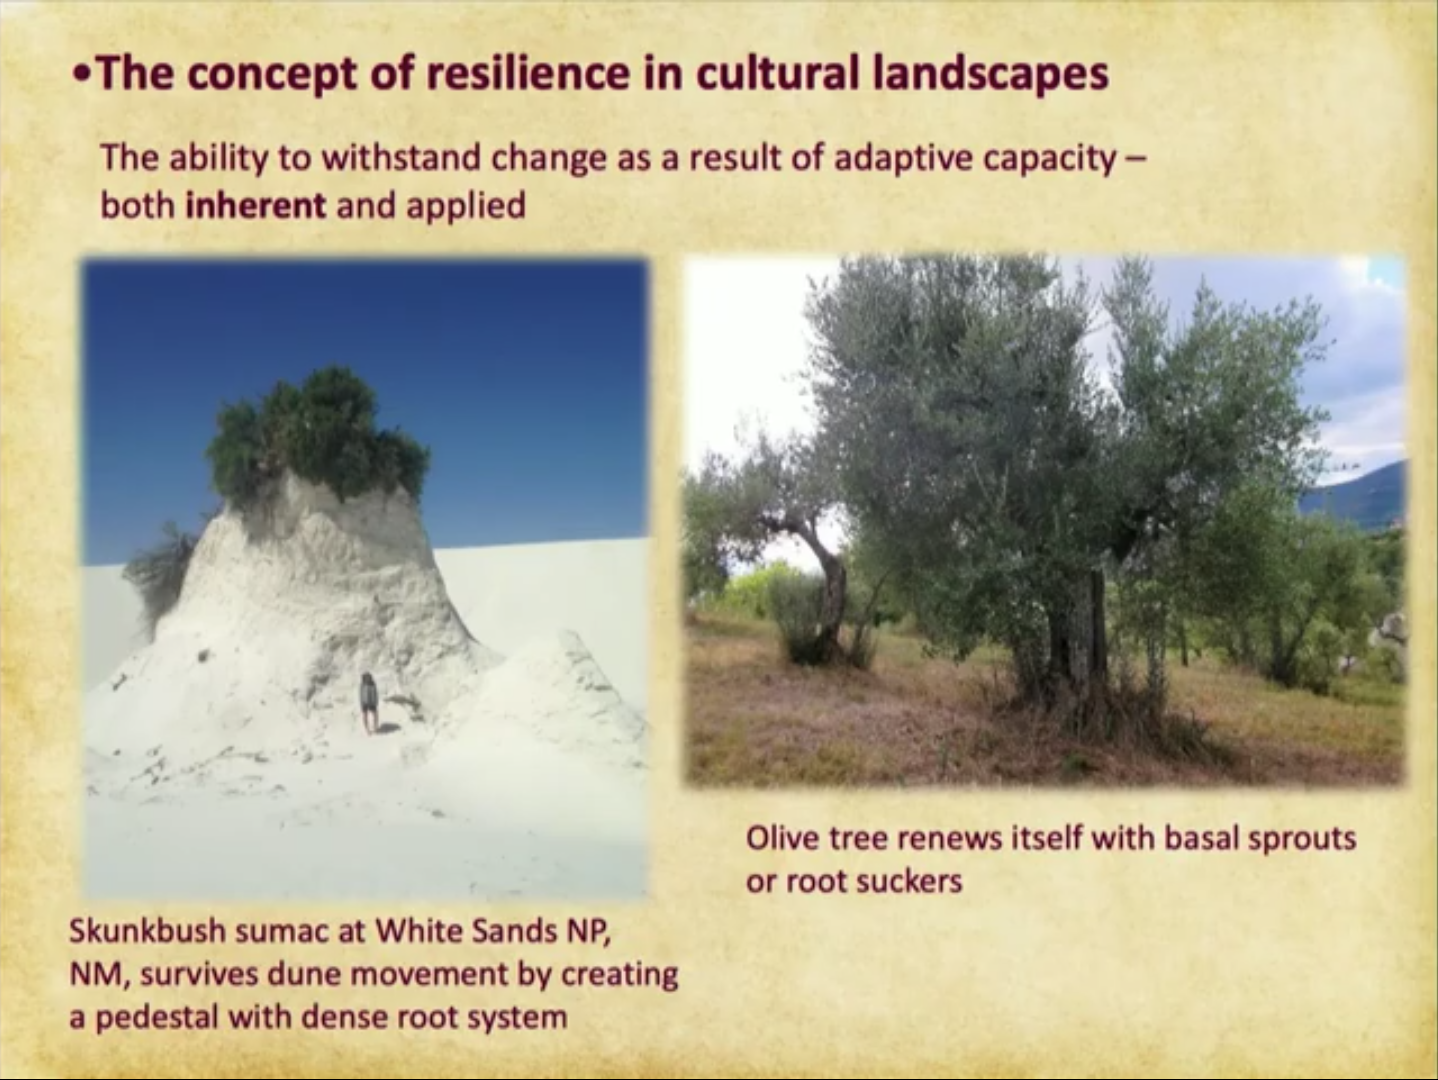 Photos of Skunkbush sumac at White Sands NP (left) and an olive tree, which renews itself with basal sprouts or root suckers.